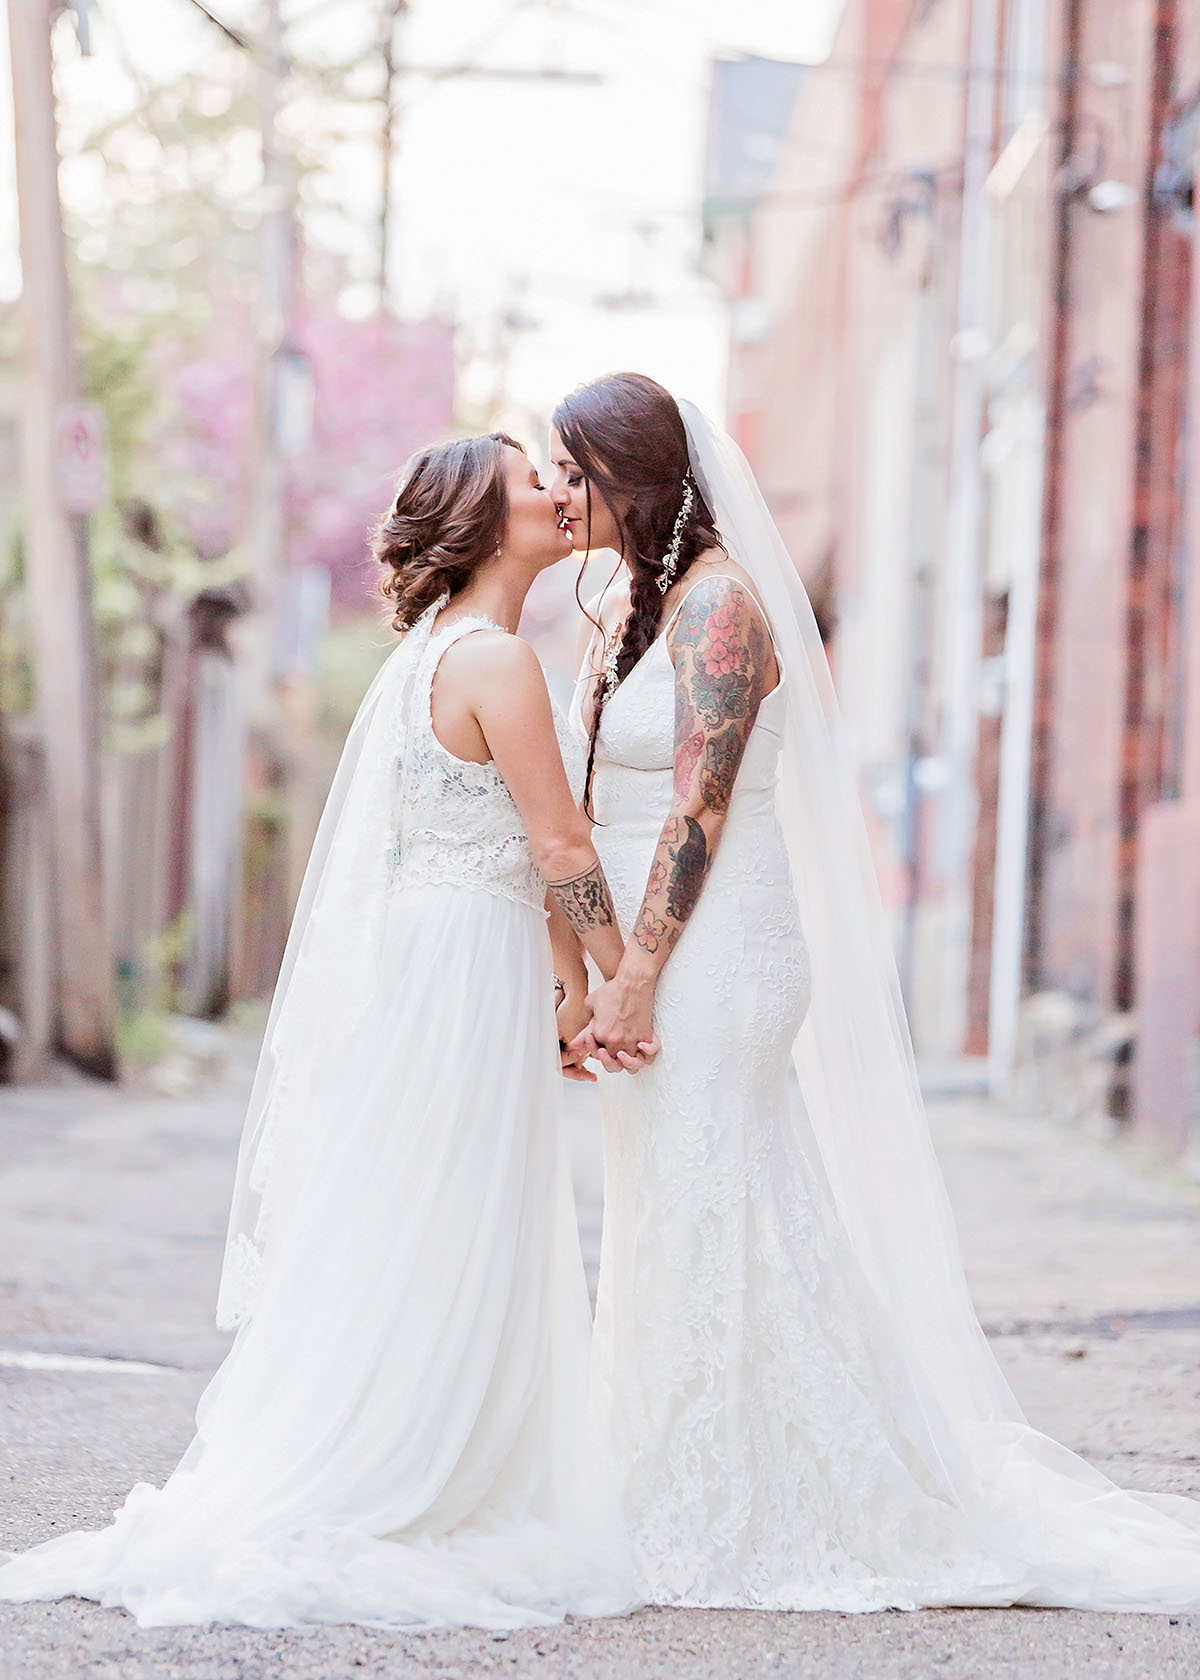 Rainbow double wedding inspiration two brides two grooms Pride colorful white dresses tattoos